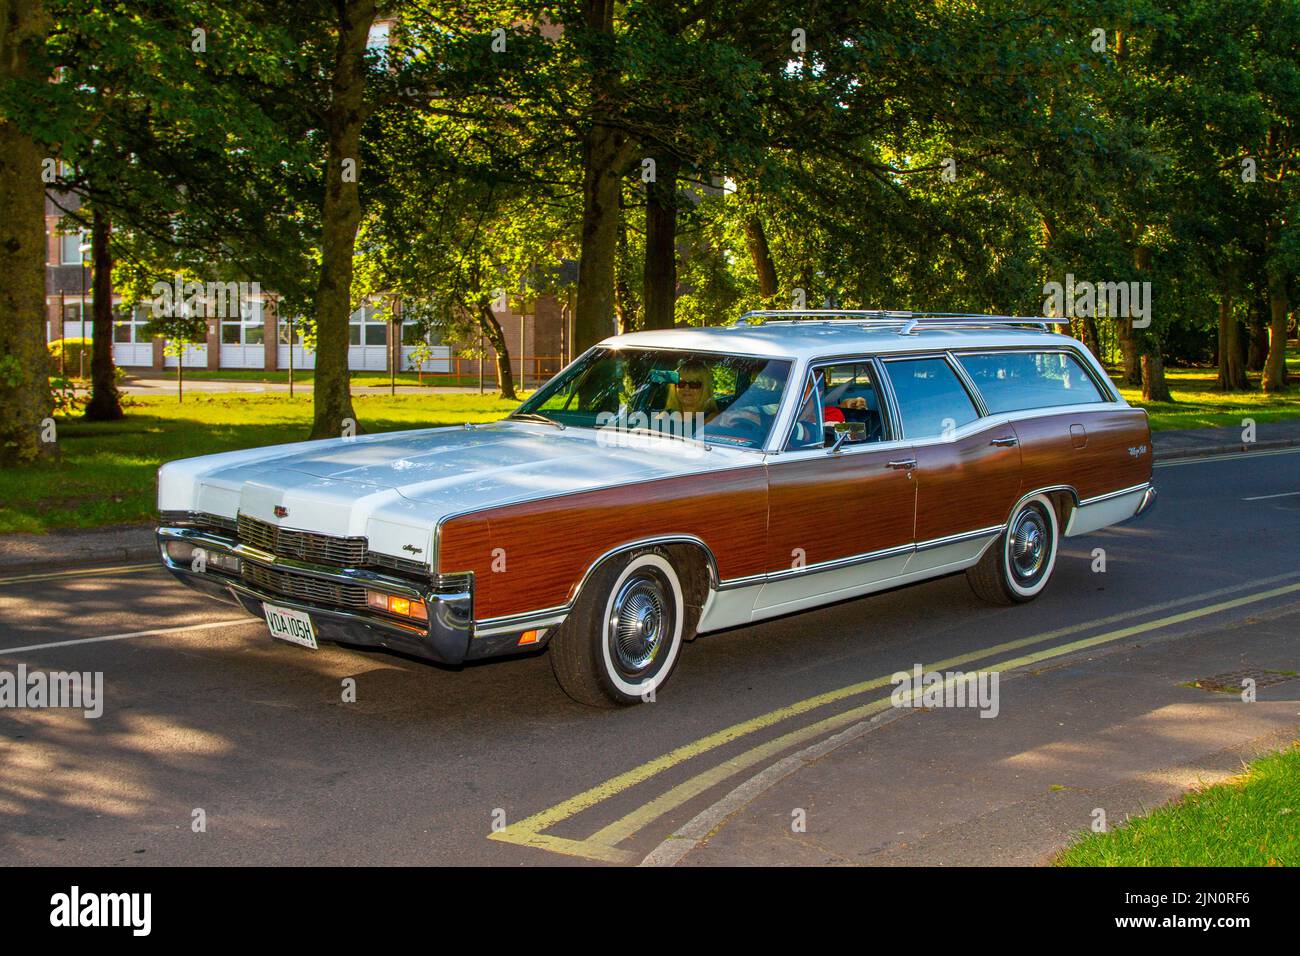 1970 70s, seventies white brown Mercury Grand Marquis automobile Wagon 7033cc Muscle Estate car; USA Cars and motorcycles on display at the 13th Lytham Hall Summer Classic Car & Motorcycle Show, a Classic Vintage Collectible Transport Festival. Stock Photo